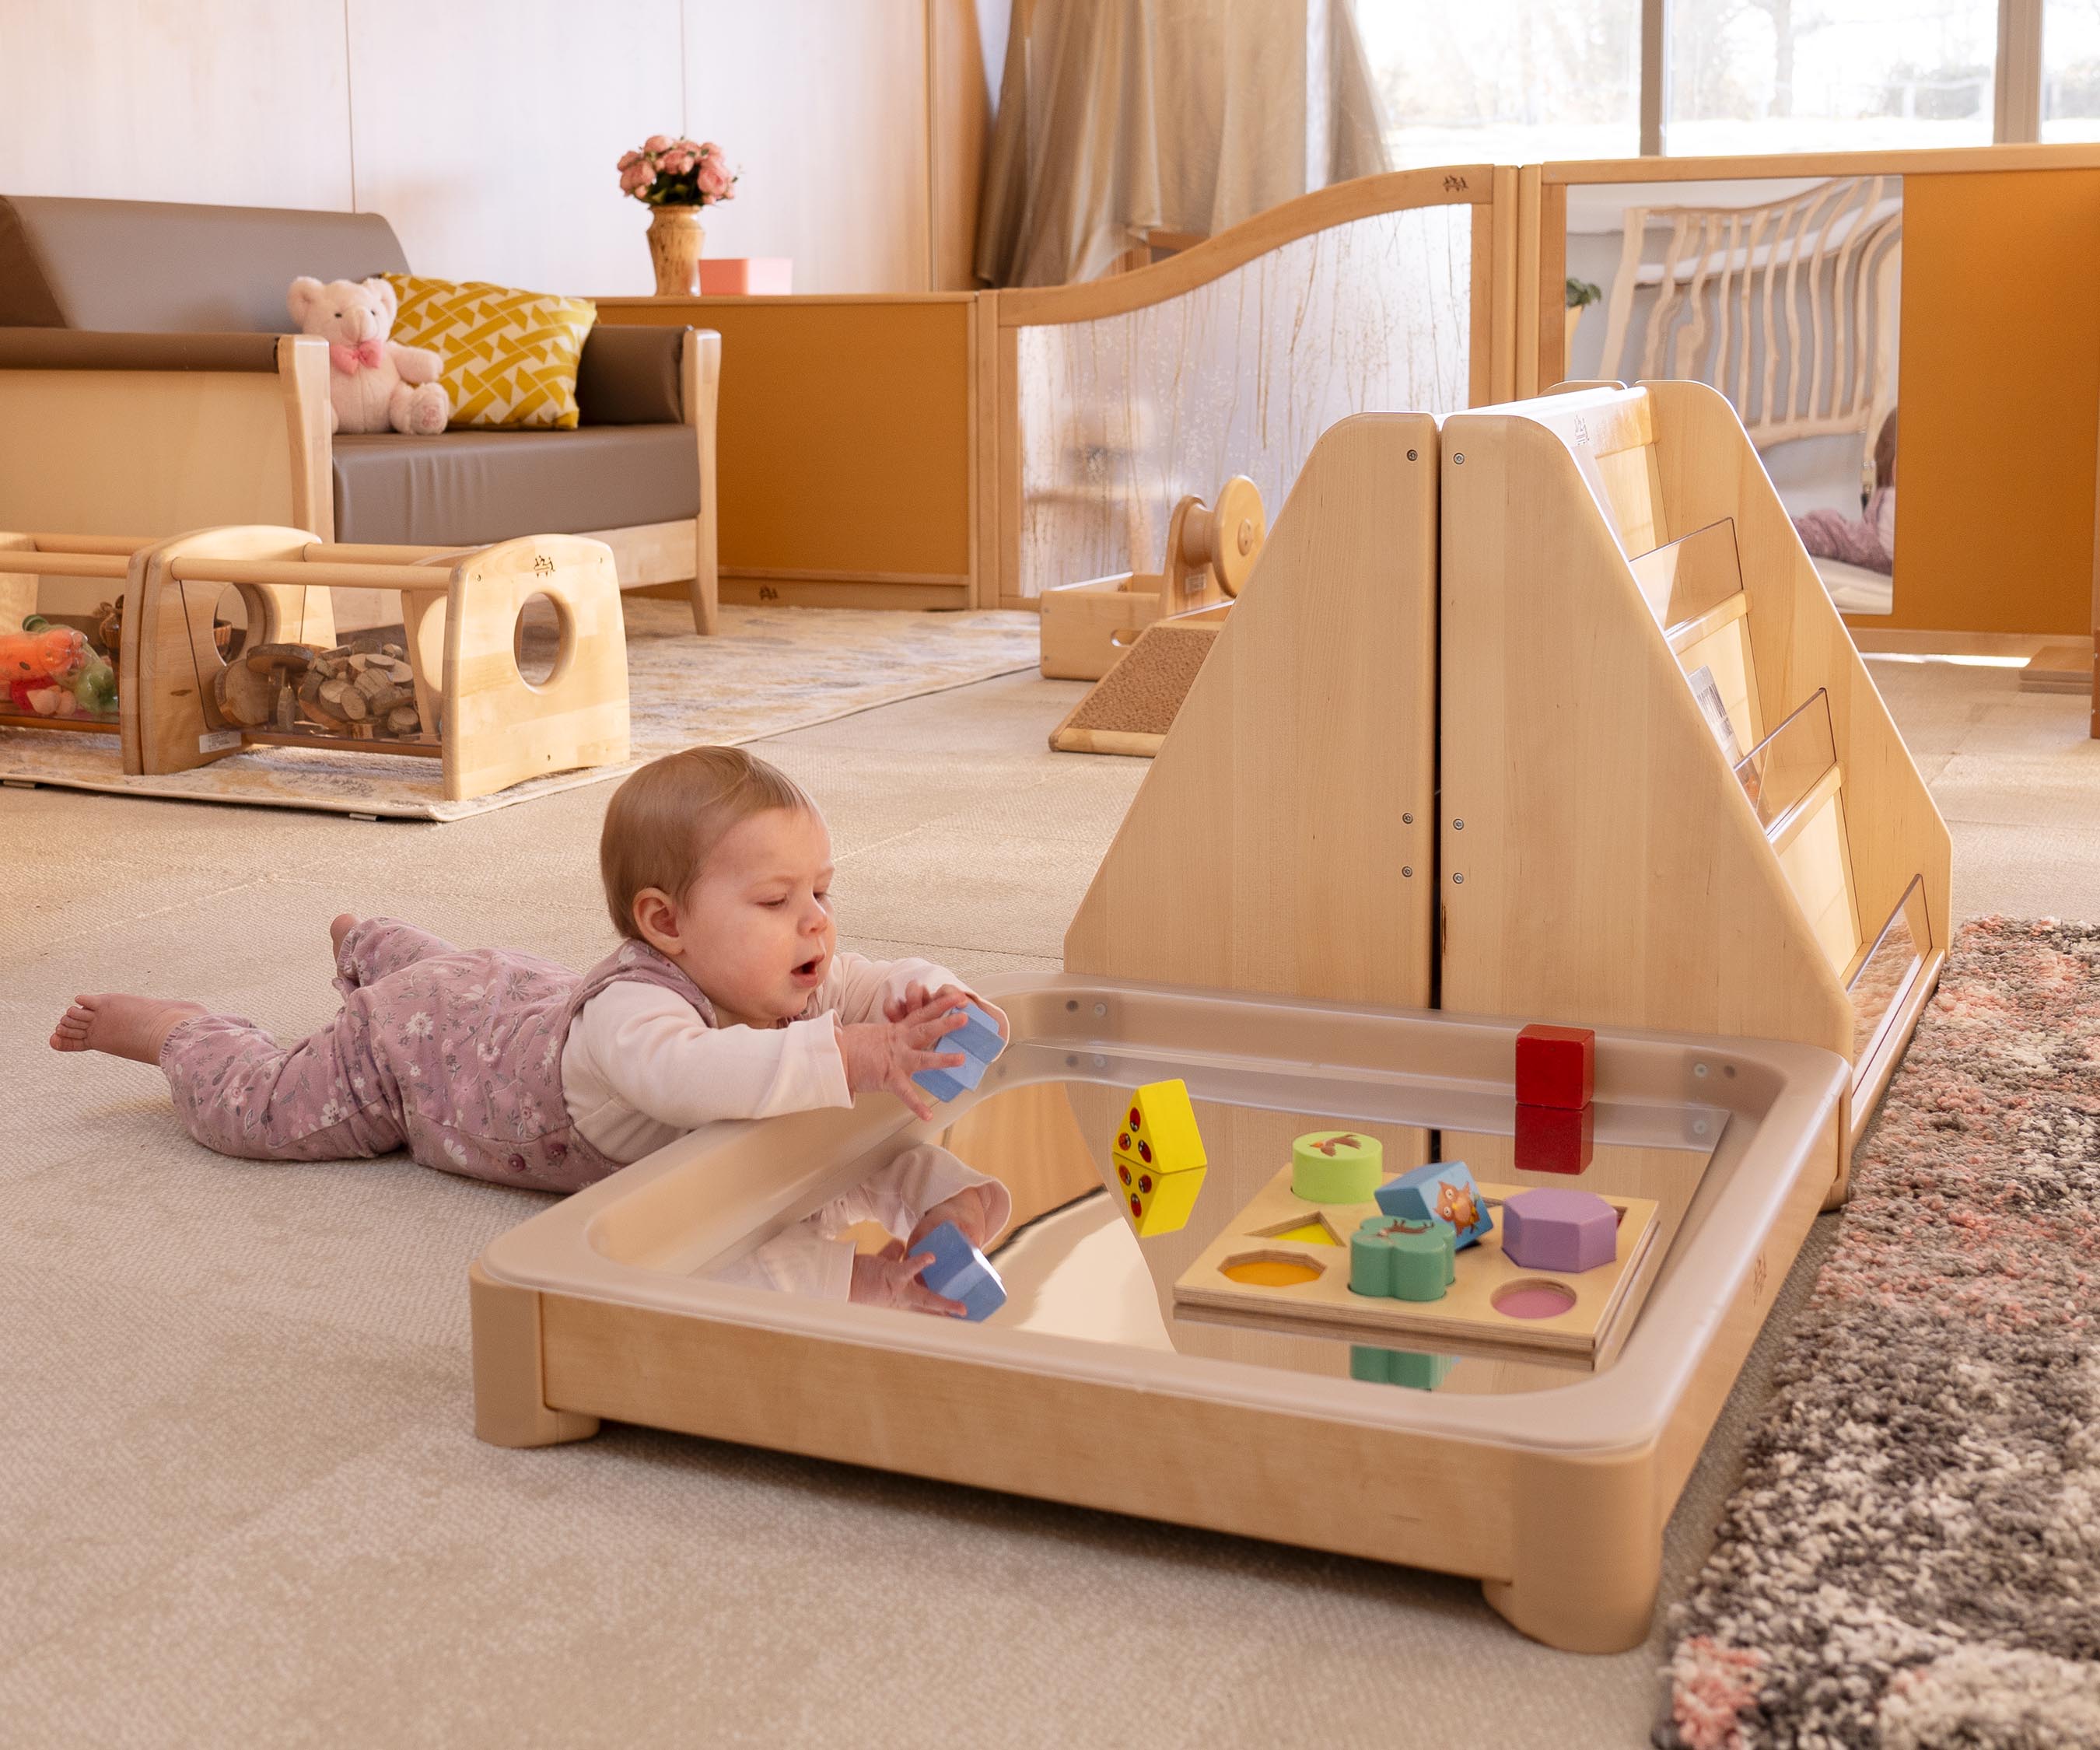 Baby girl in lavender romper playing with a wooden puzzle in an Activity floor tray, a tuff tray alternative that allows even small children to reach the centre.